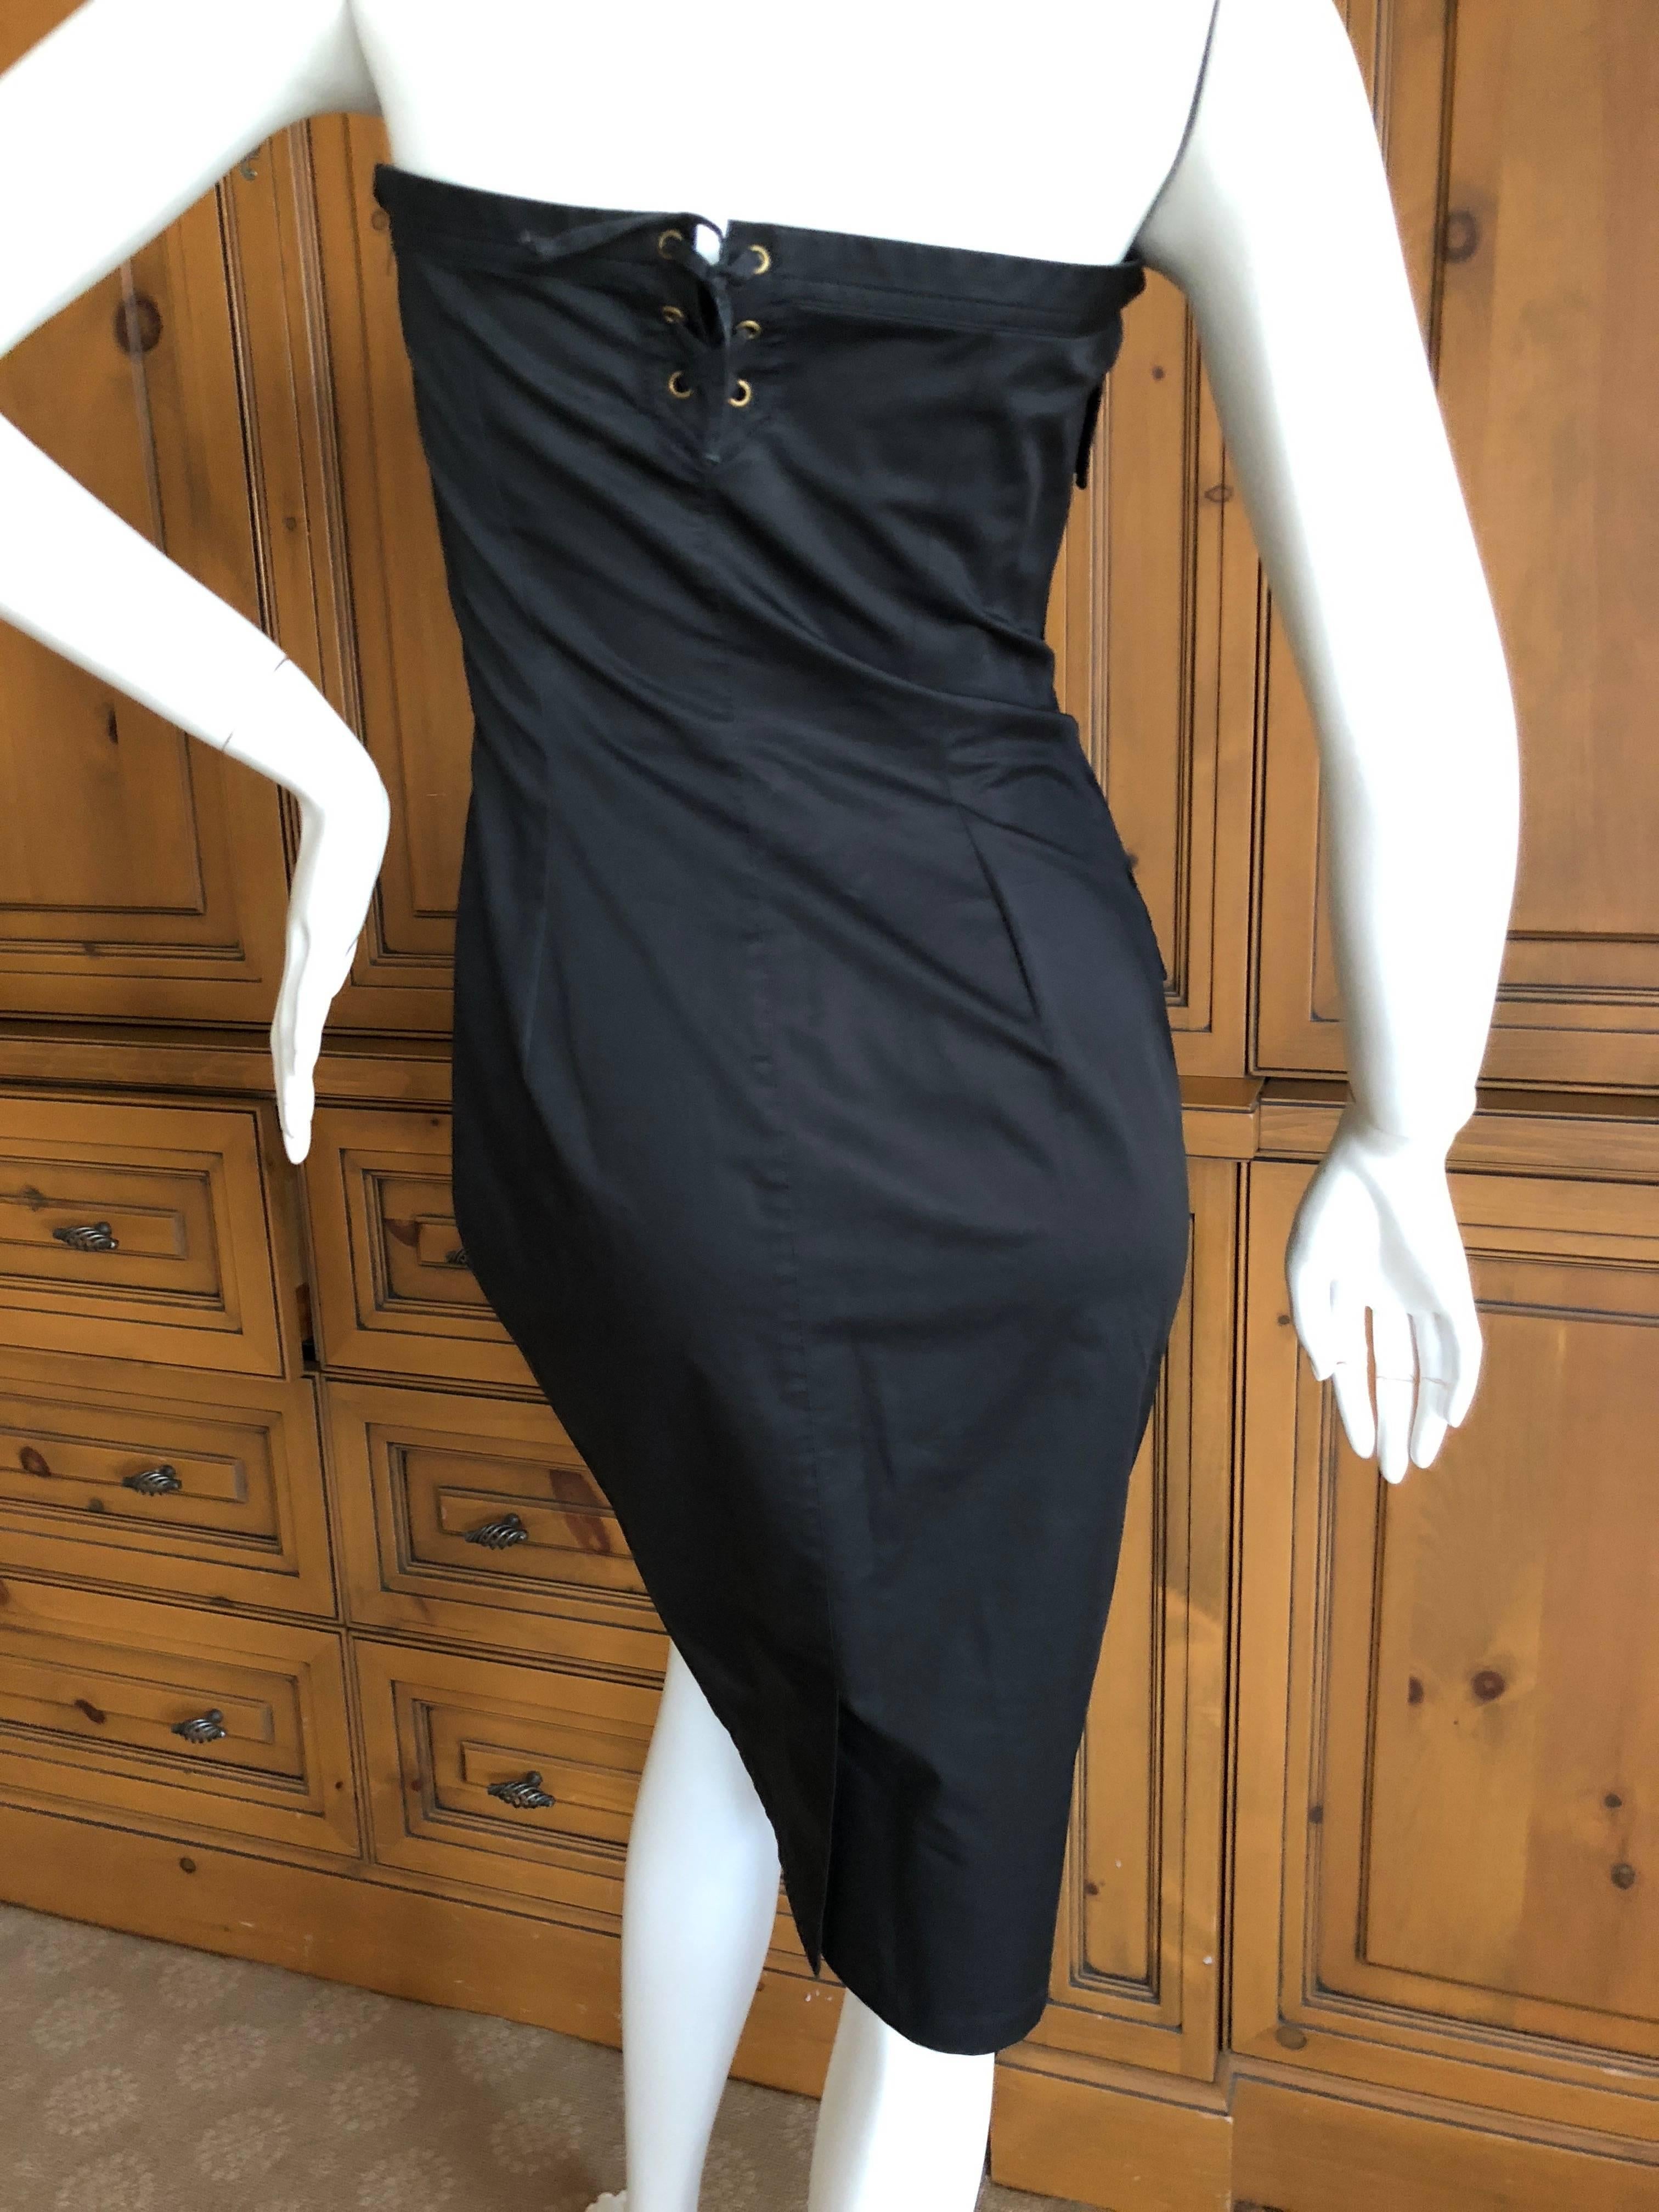 Yves Saint Laurent by Tom Ford Strapless Black Safari Dress with Corset Lacing  For Sale 3